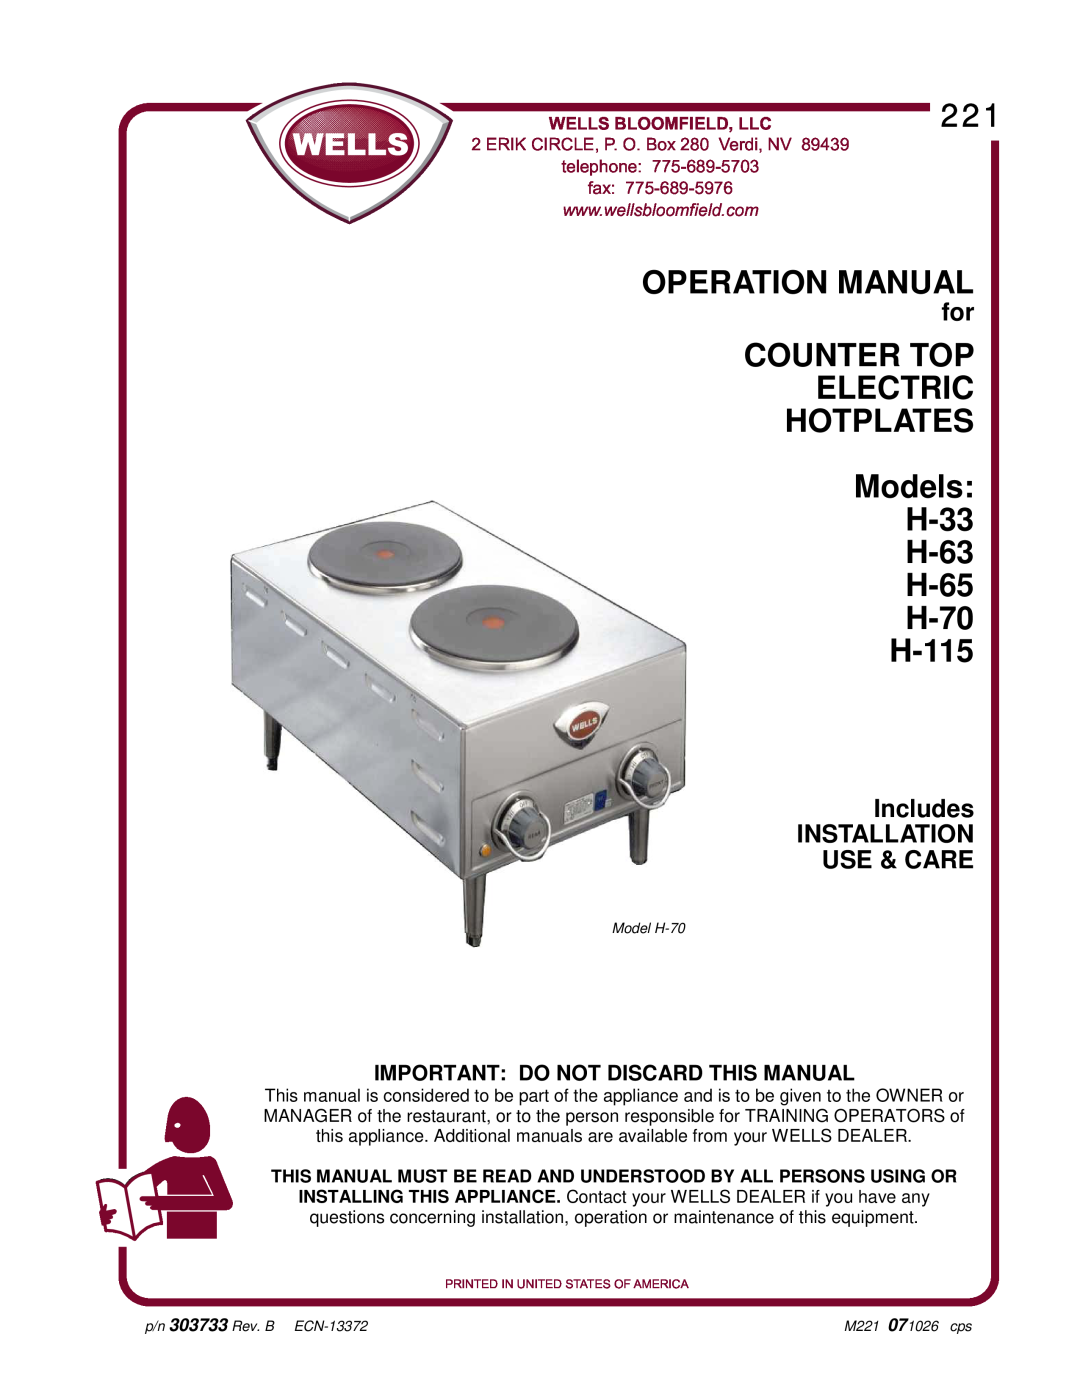 Wells H-70 operation manual Includes INSTALLATION USE & CARE, Counter Top Electric Hotplates, Wells Manufacturing Company 